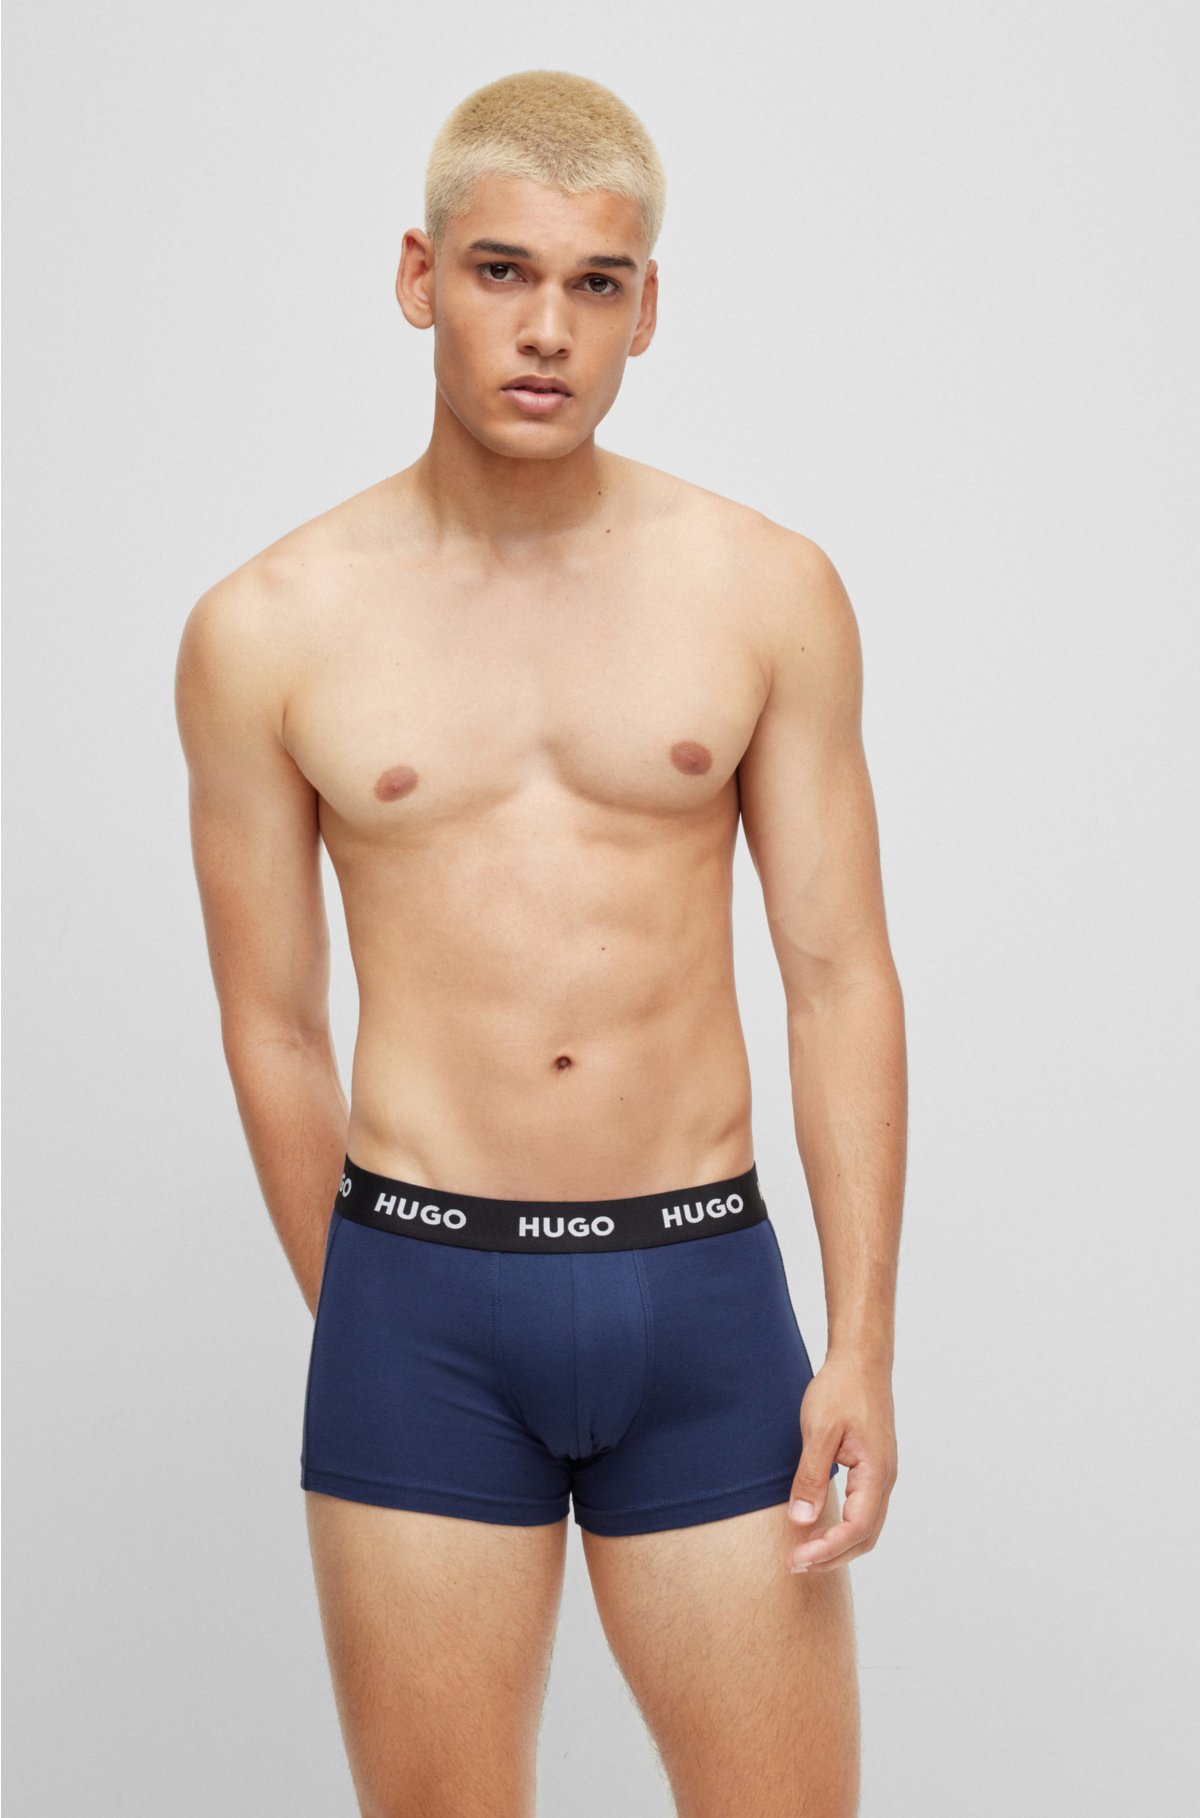 HUGO - Three-pack of logo-waistband trunks in stretch cotton